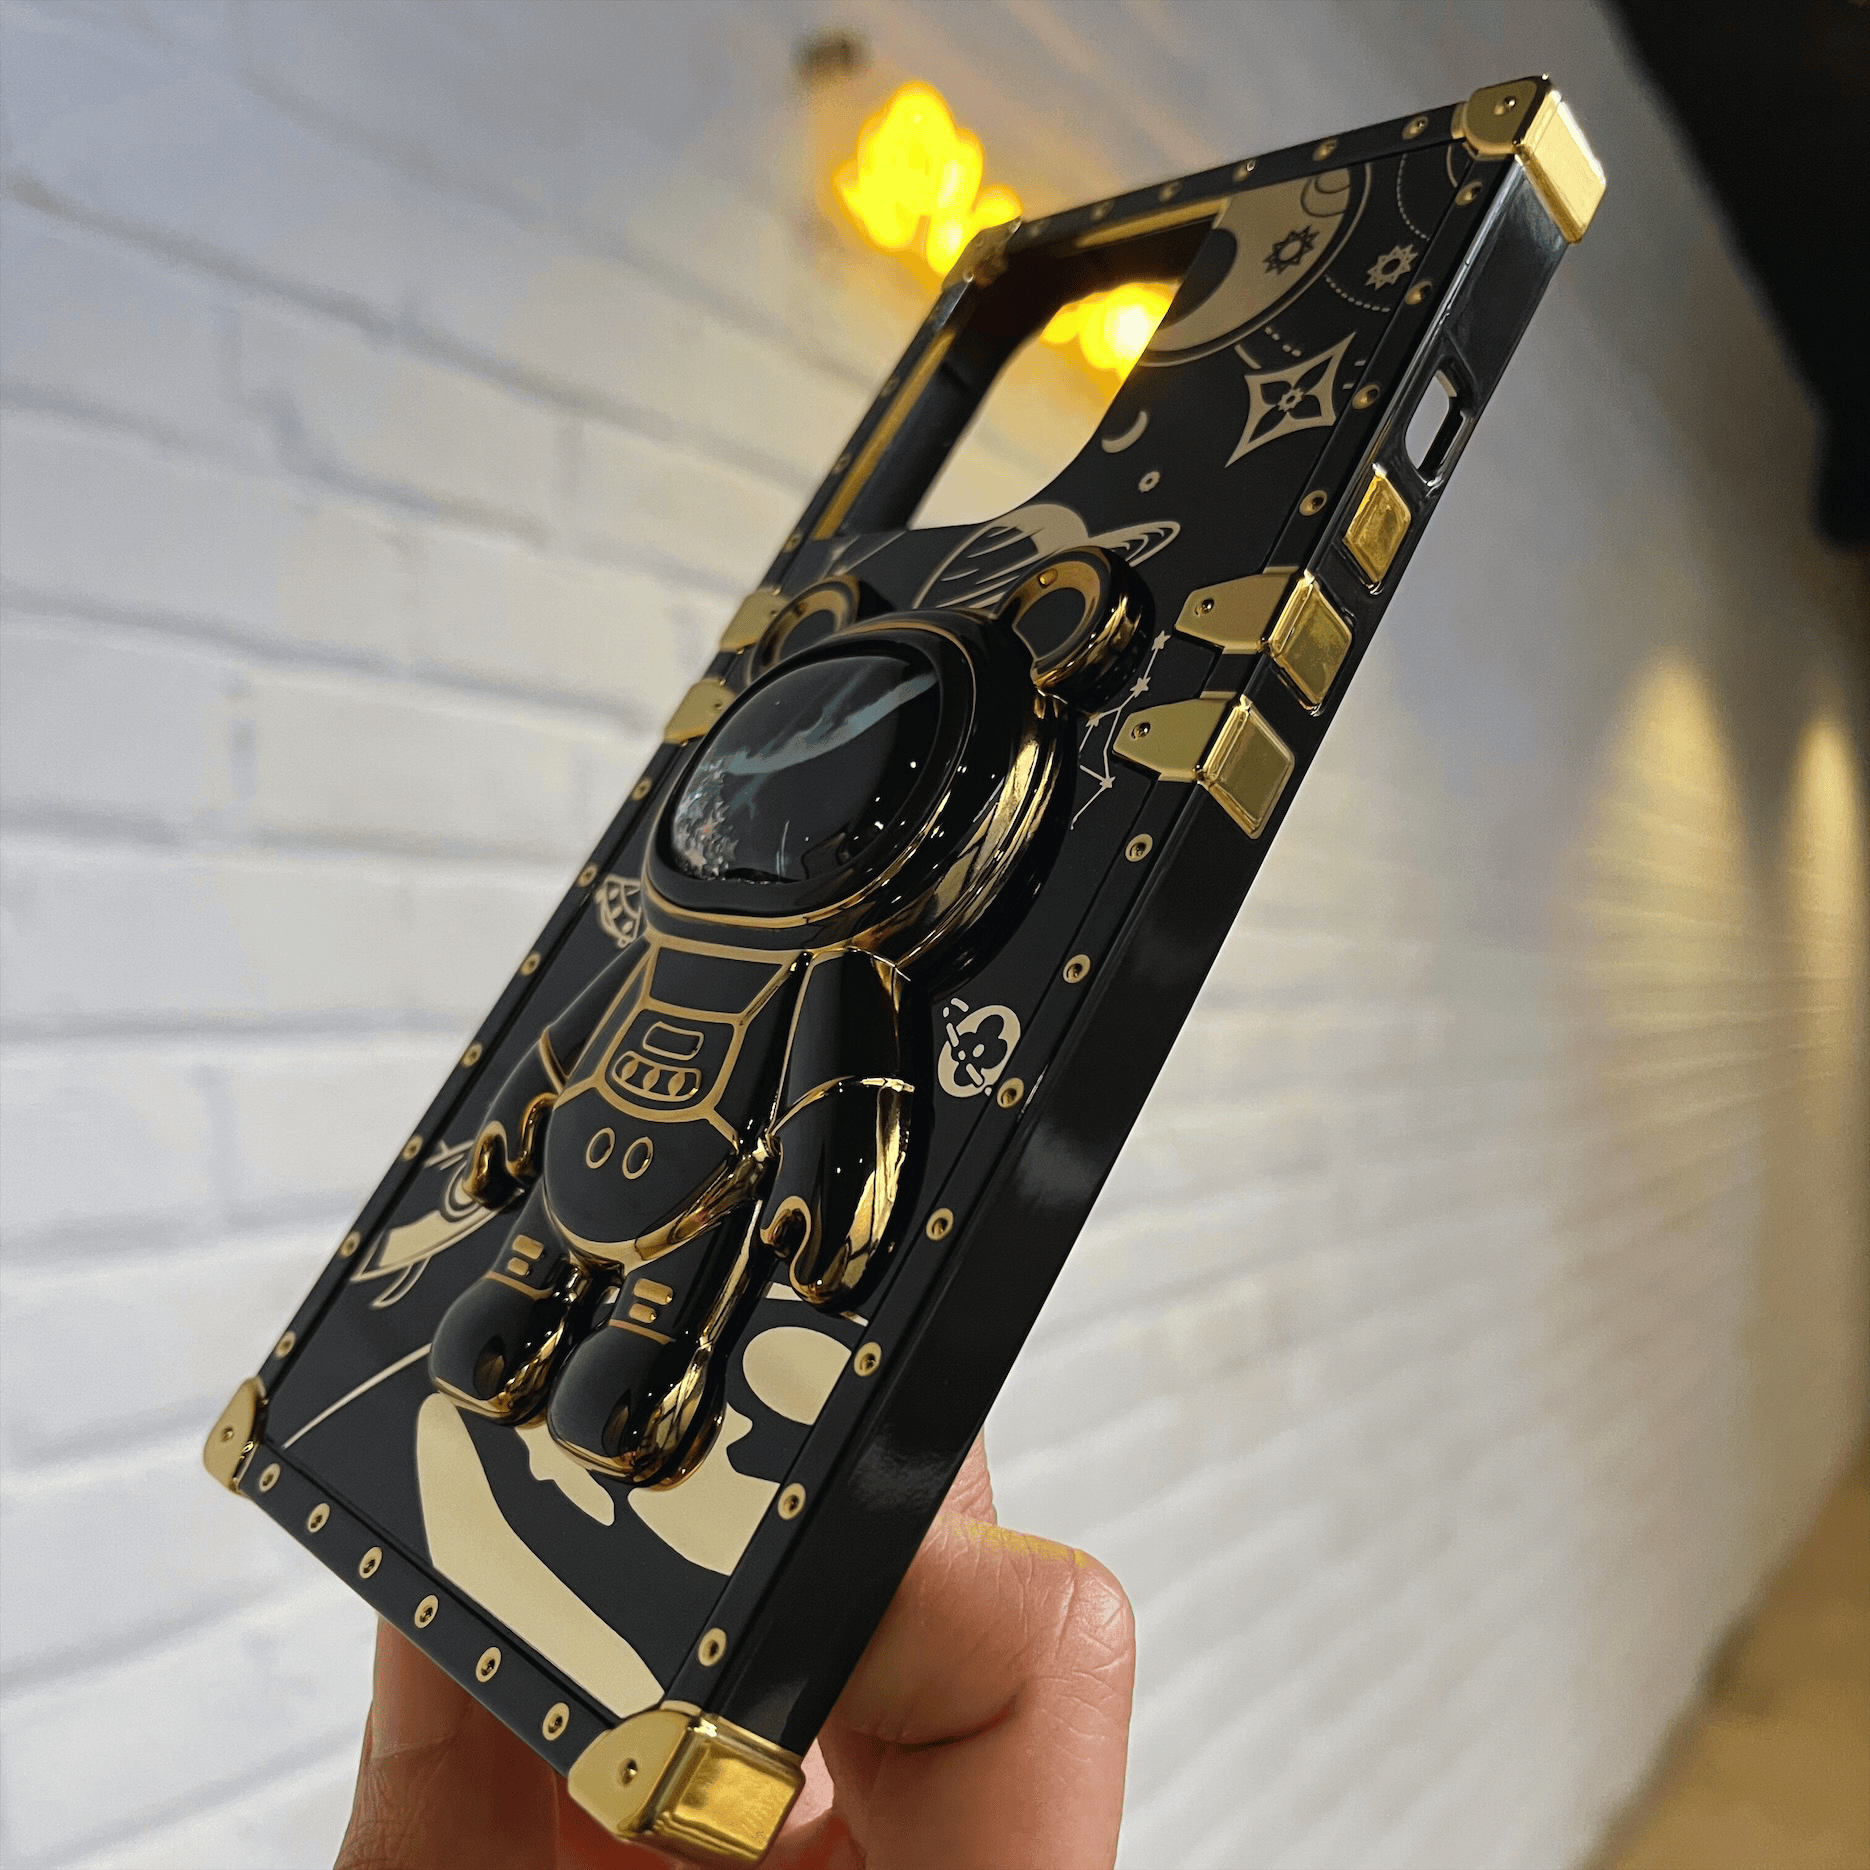 iPhone 11 Luxury Space Bear Case With Hidden Folding Stand Case